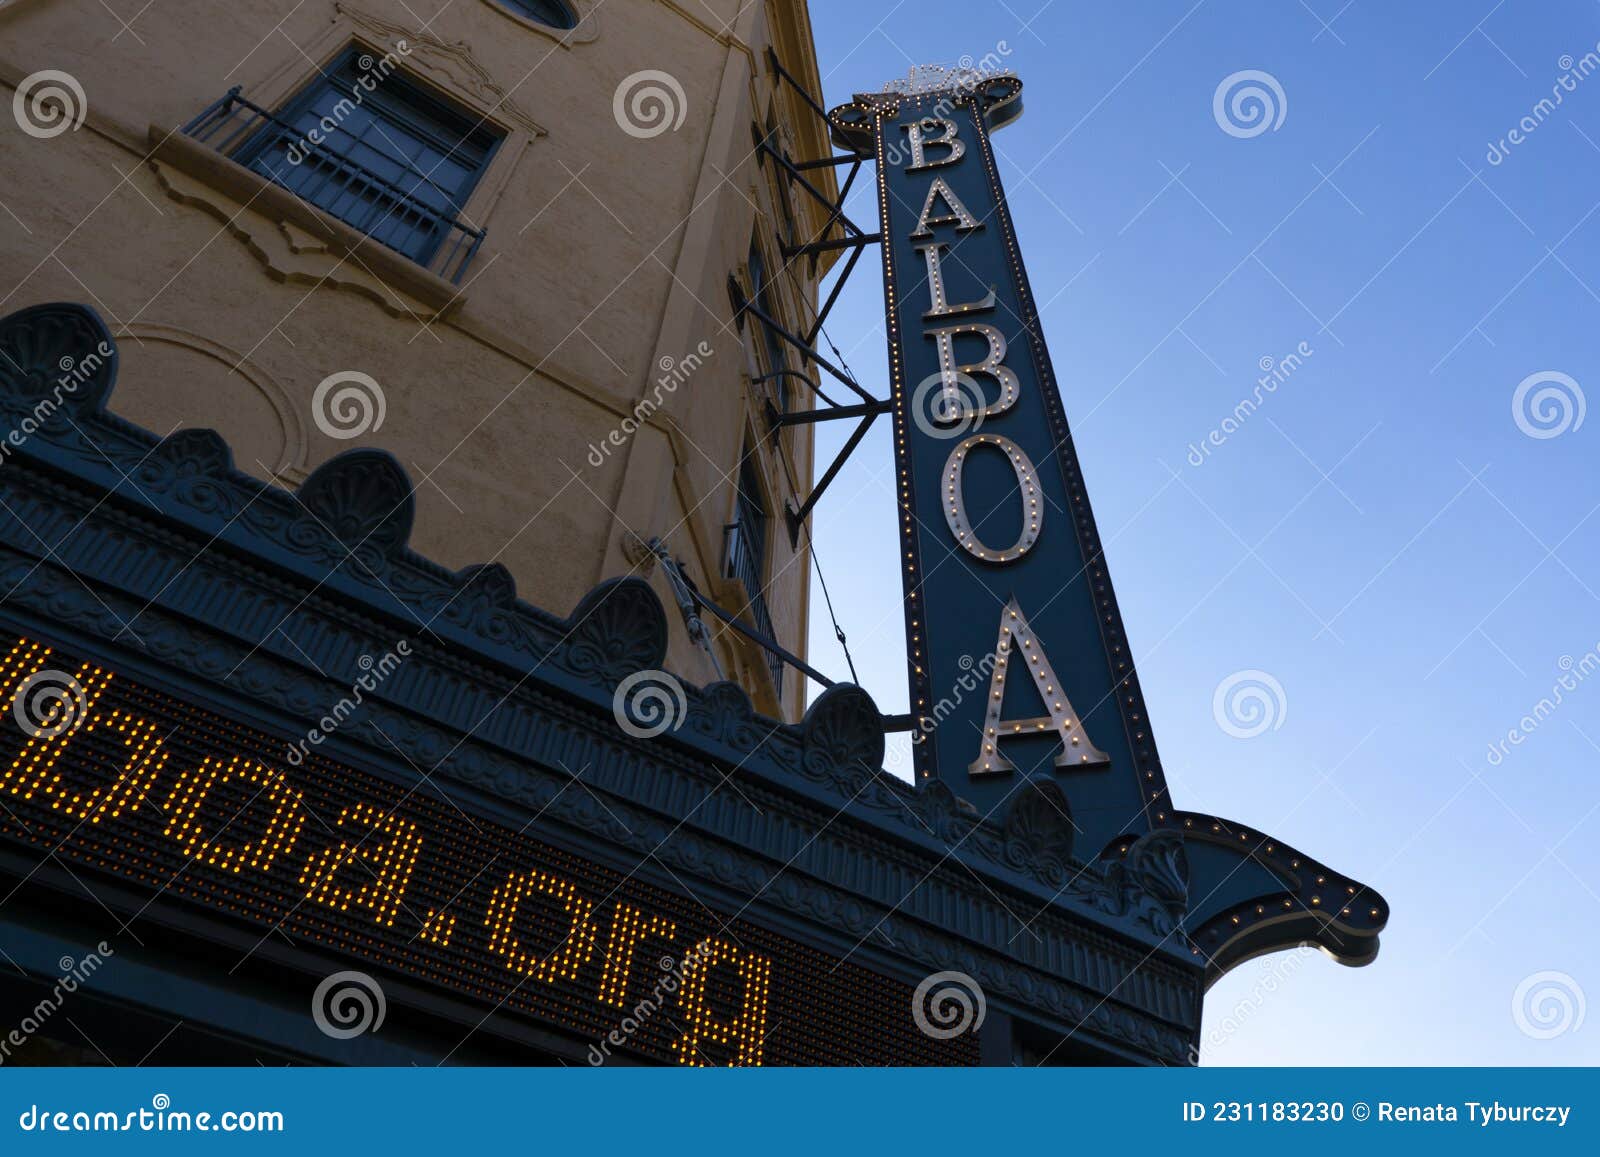 San Diego Usa August 4 2021 Signage Of Balboa Historic Theater In